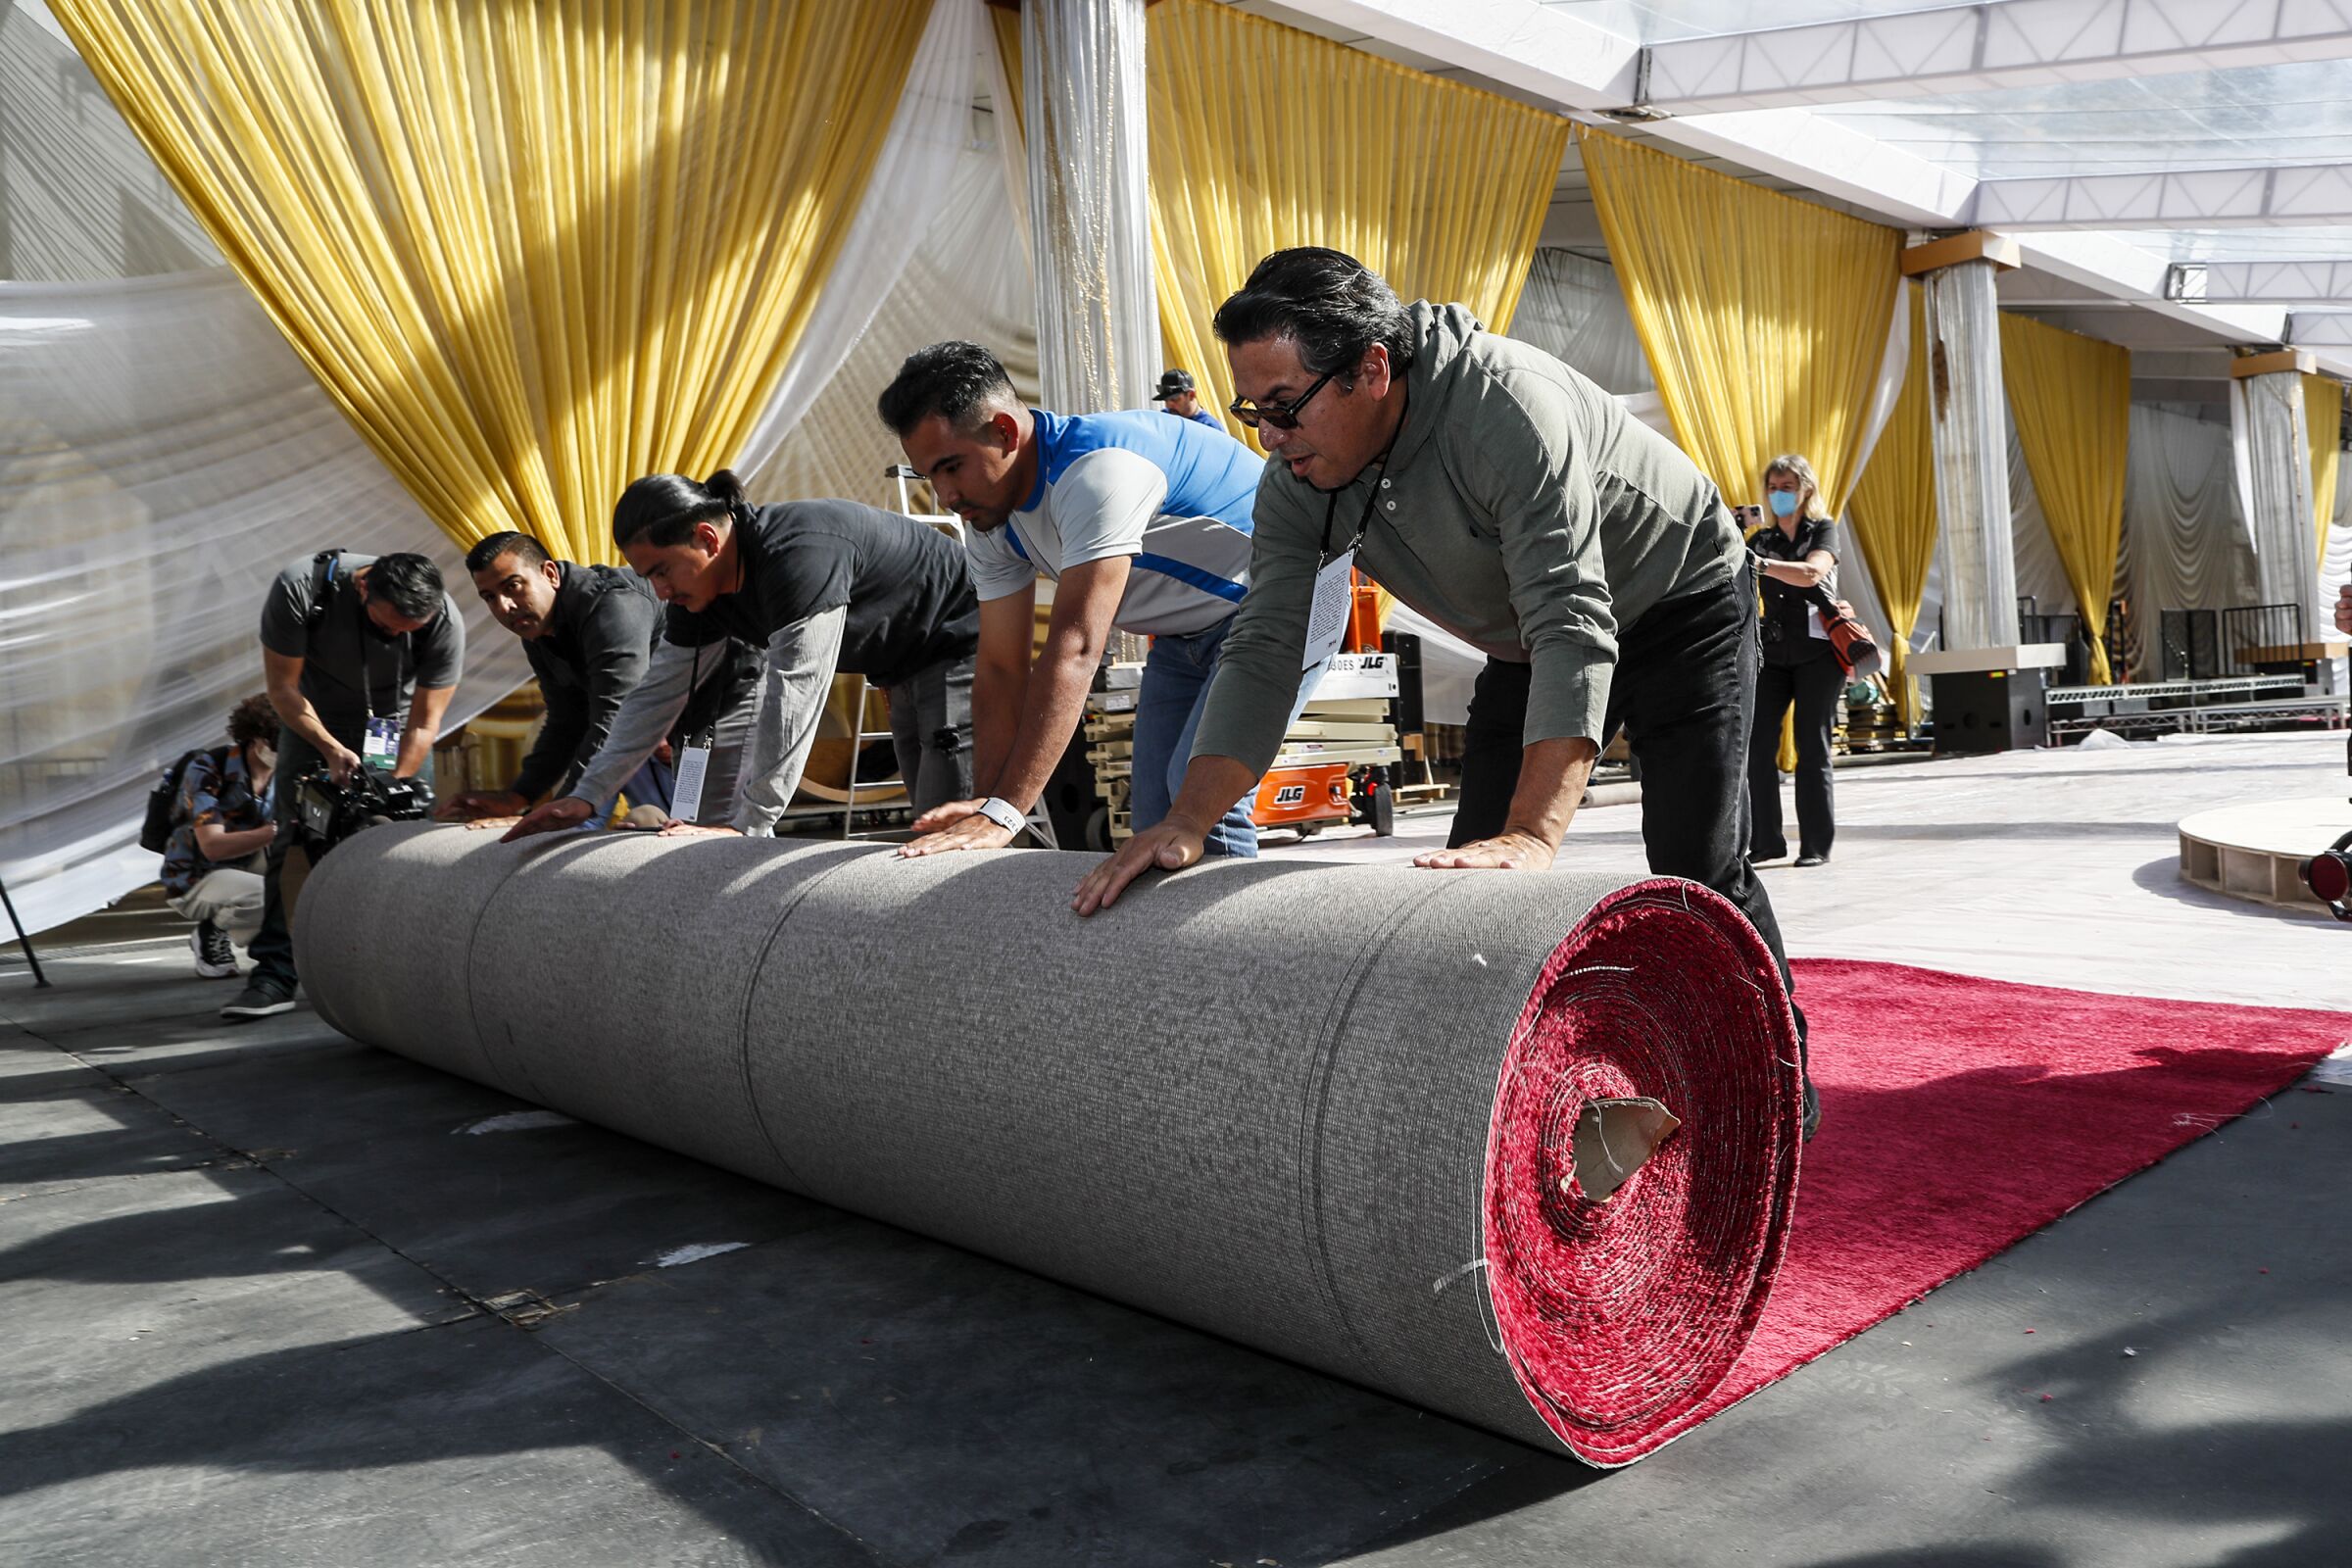  Crews roll out the red carpet area at Hollywood and Highland days before the 94th Oscars at Dolby Theater